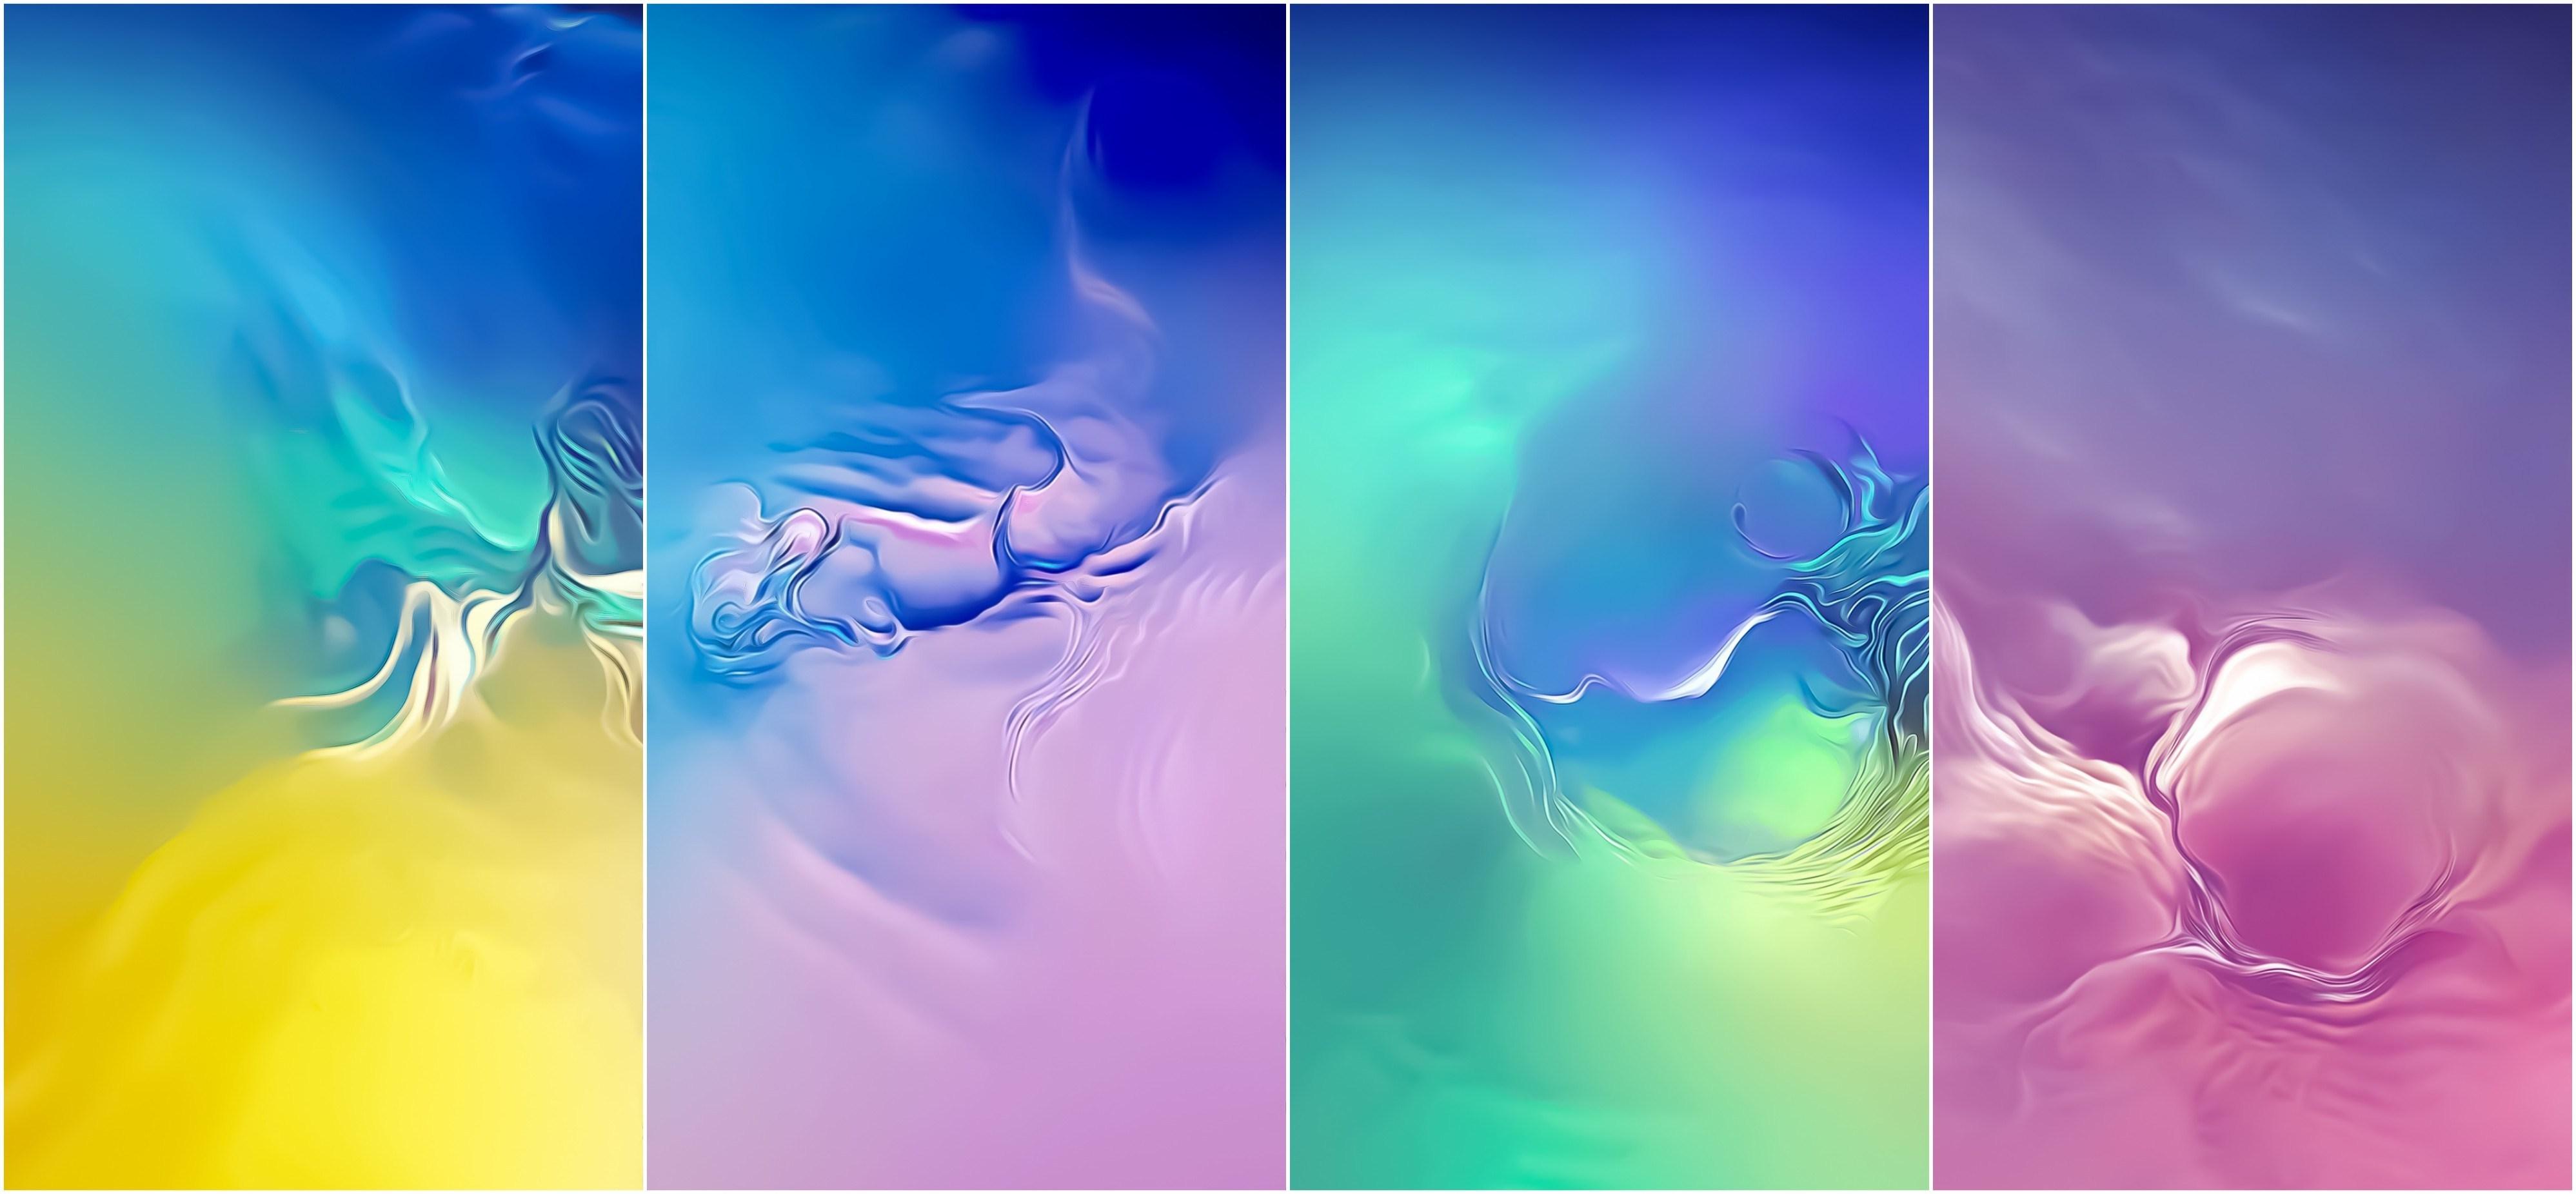 Download Samsung Galaxy S10 Stock Wallpaper File Included